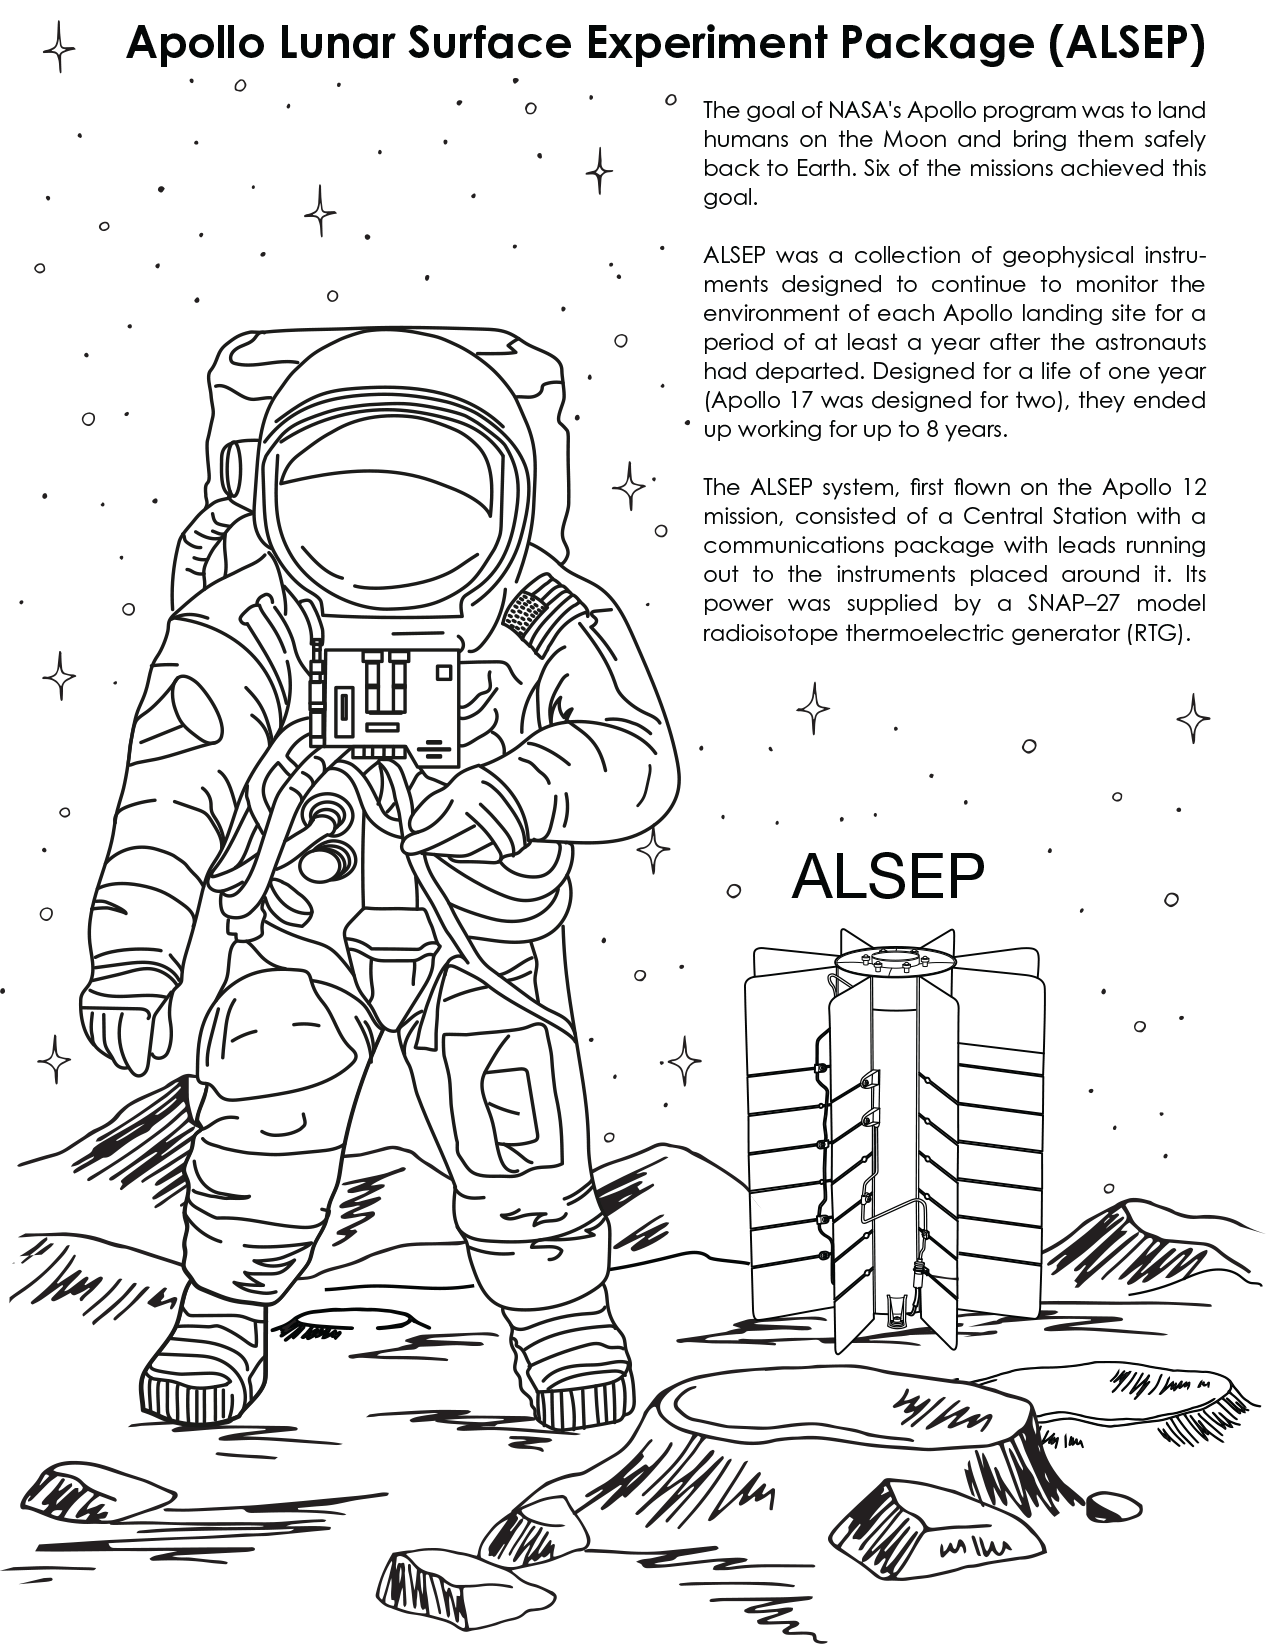 Coloring page for Apollo.